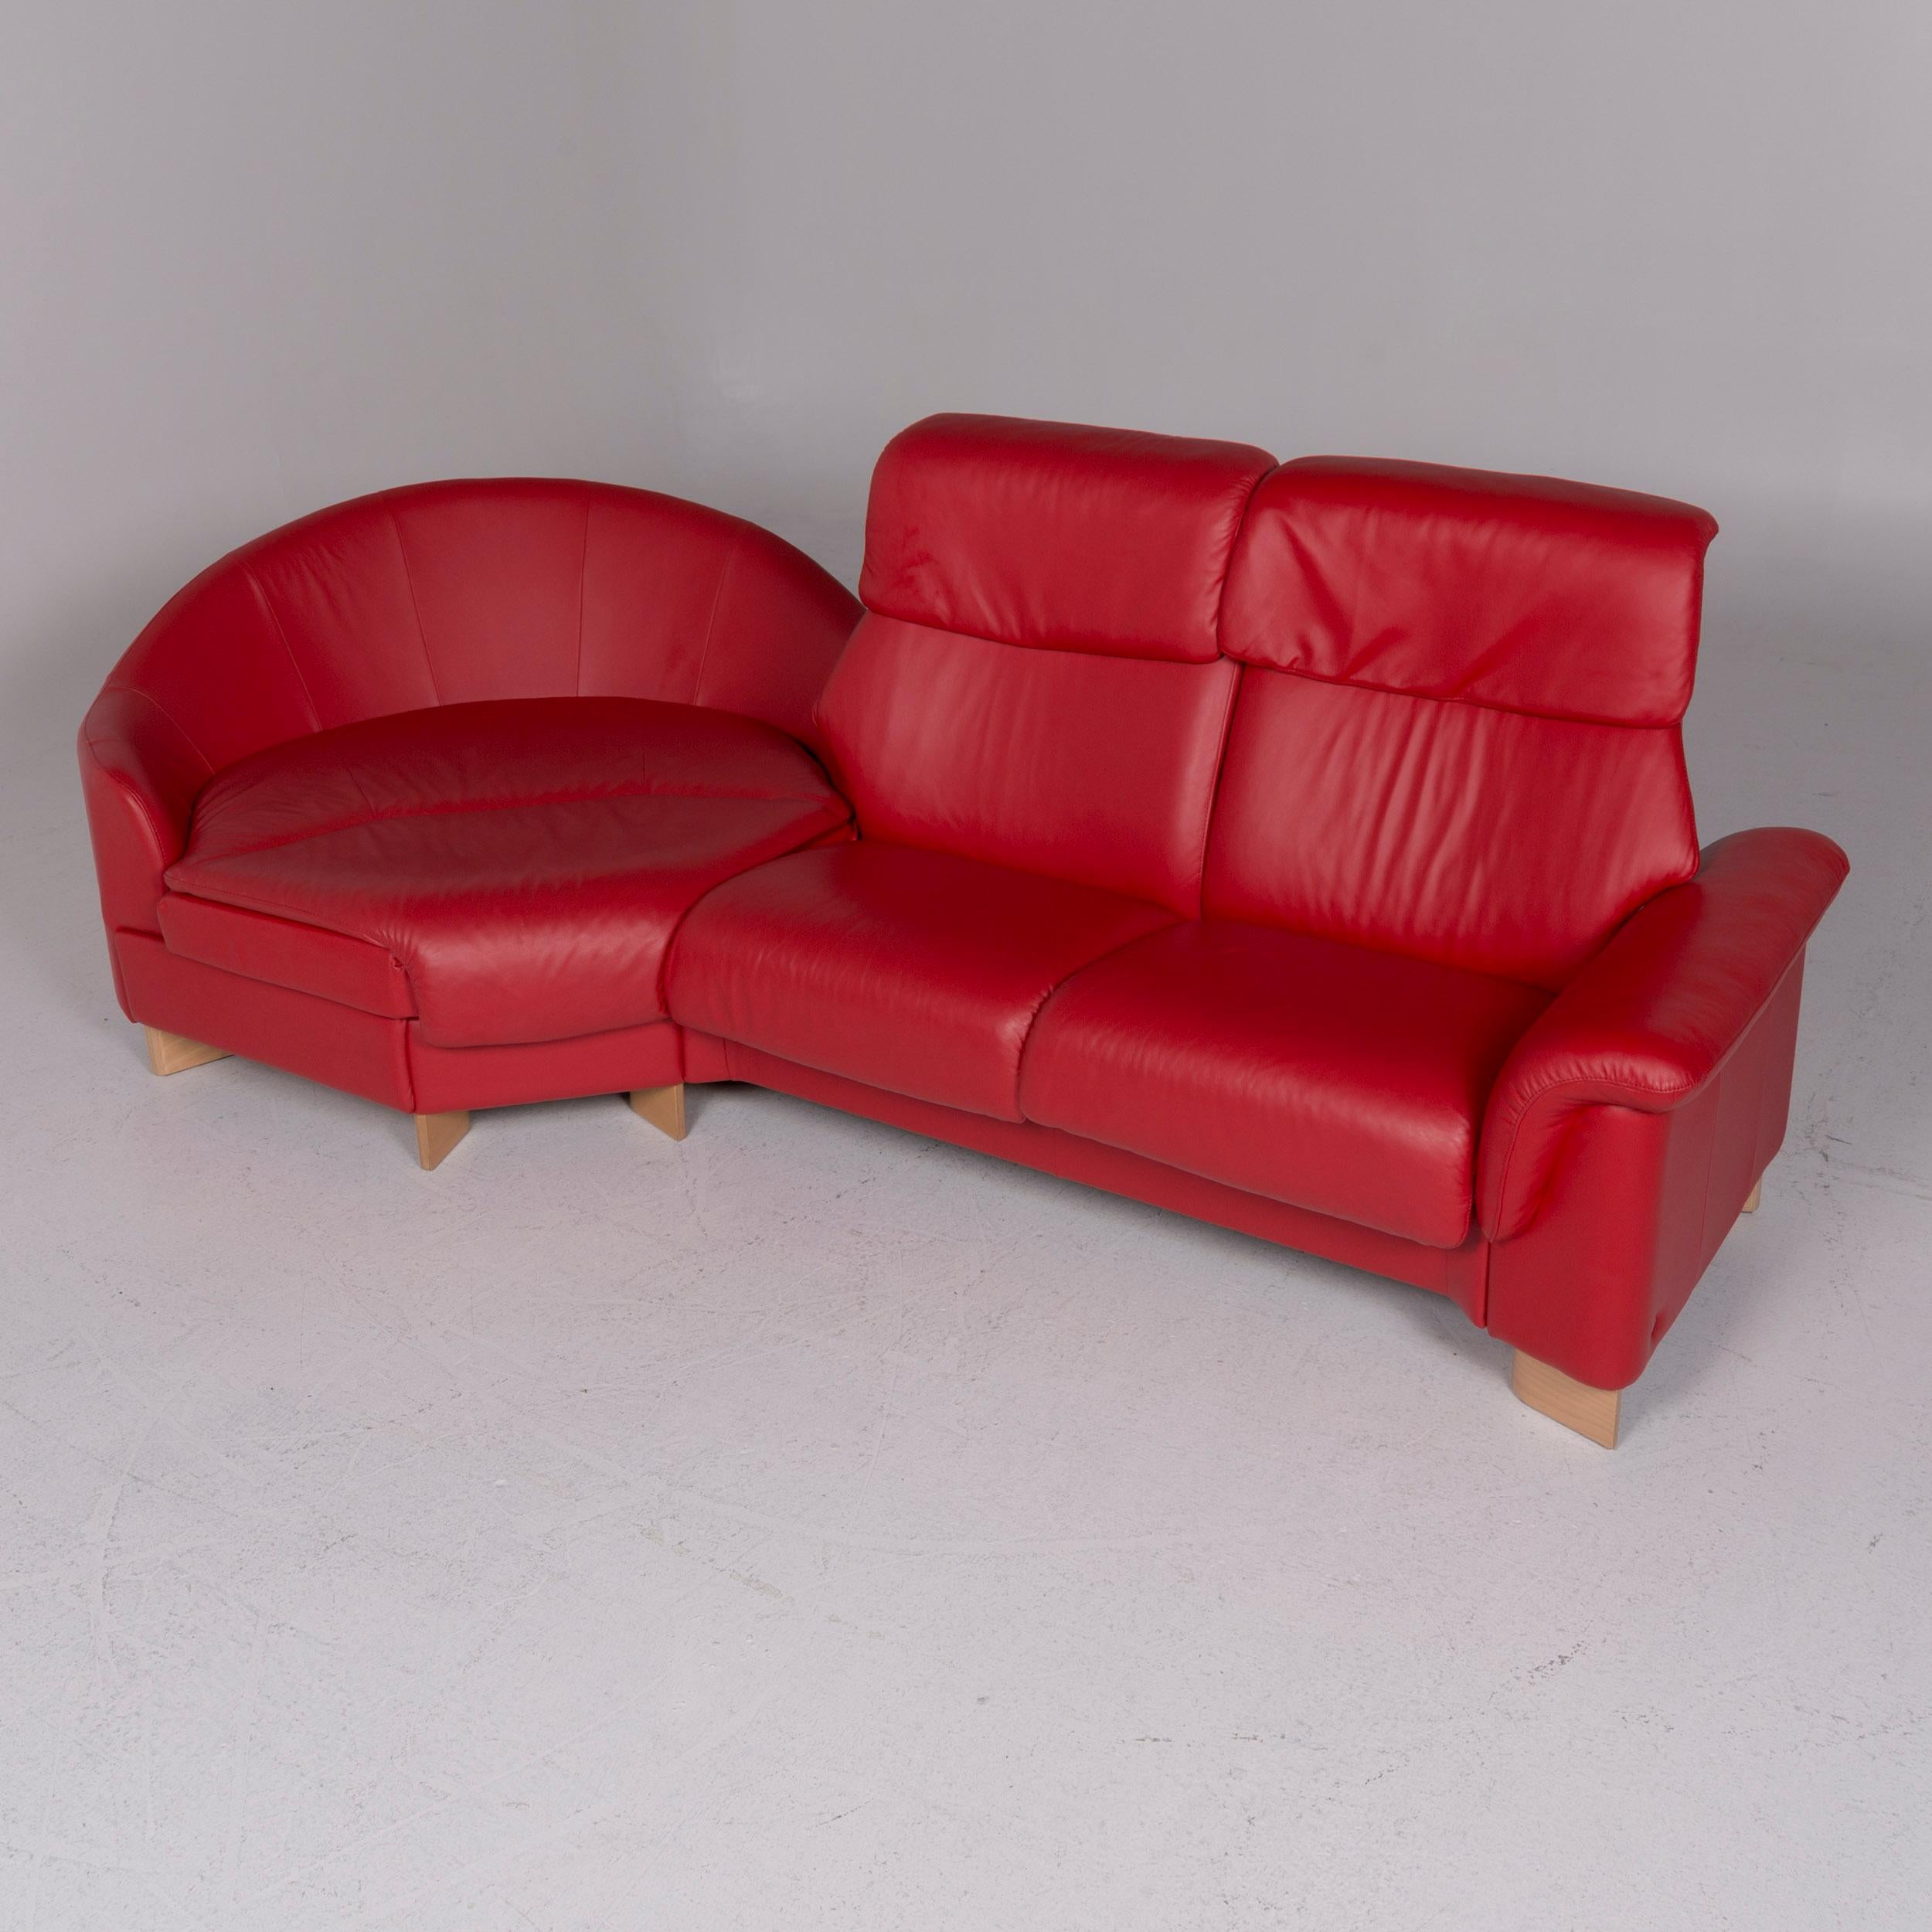 We bring to you a stressless leather sofa red corner sofa
 
Product measurements in centimeters:
 
Depth 86
Width 286
Height 104
Seat-height 46
Rest-height 59
Seat-depth 52
Seat-width 230
Back-height 60.


  